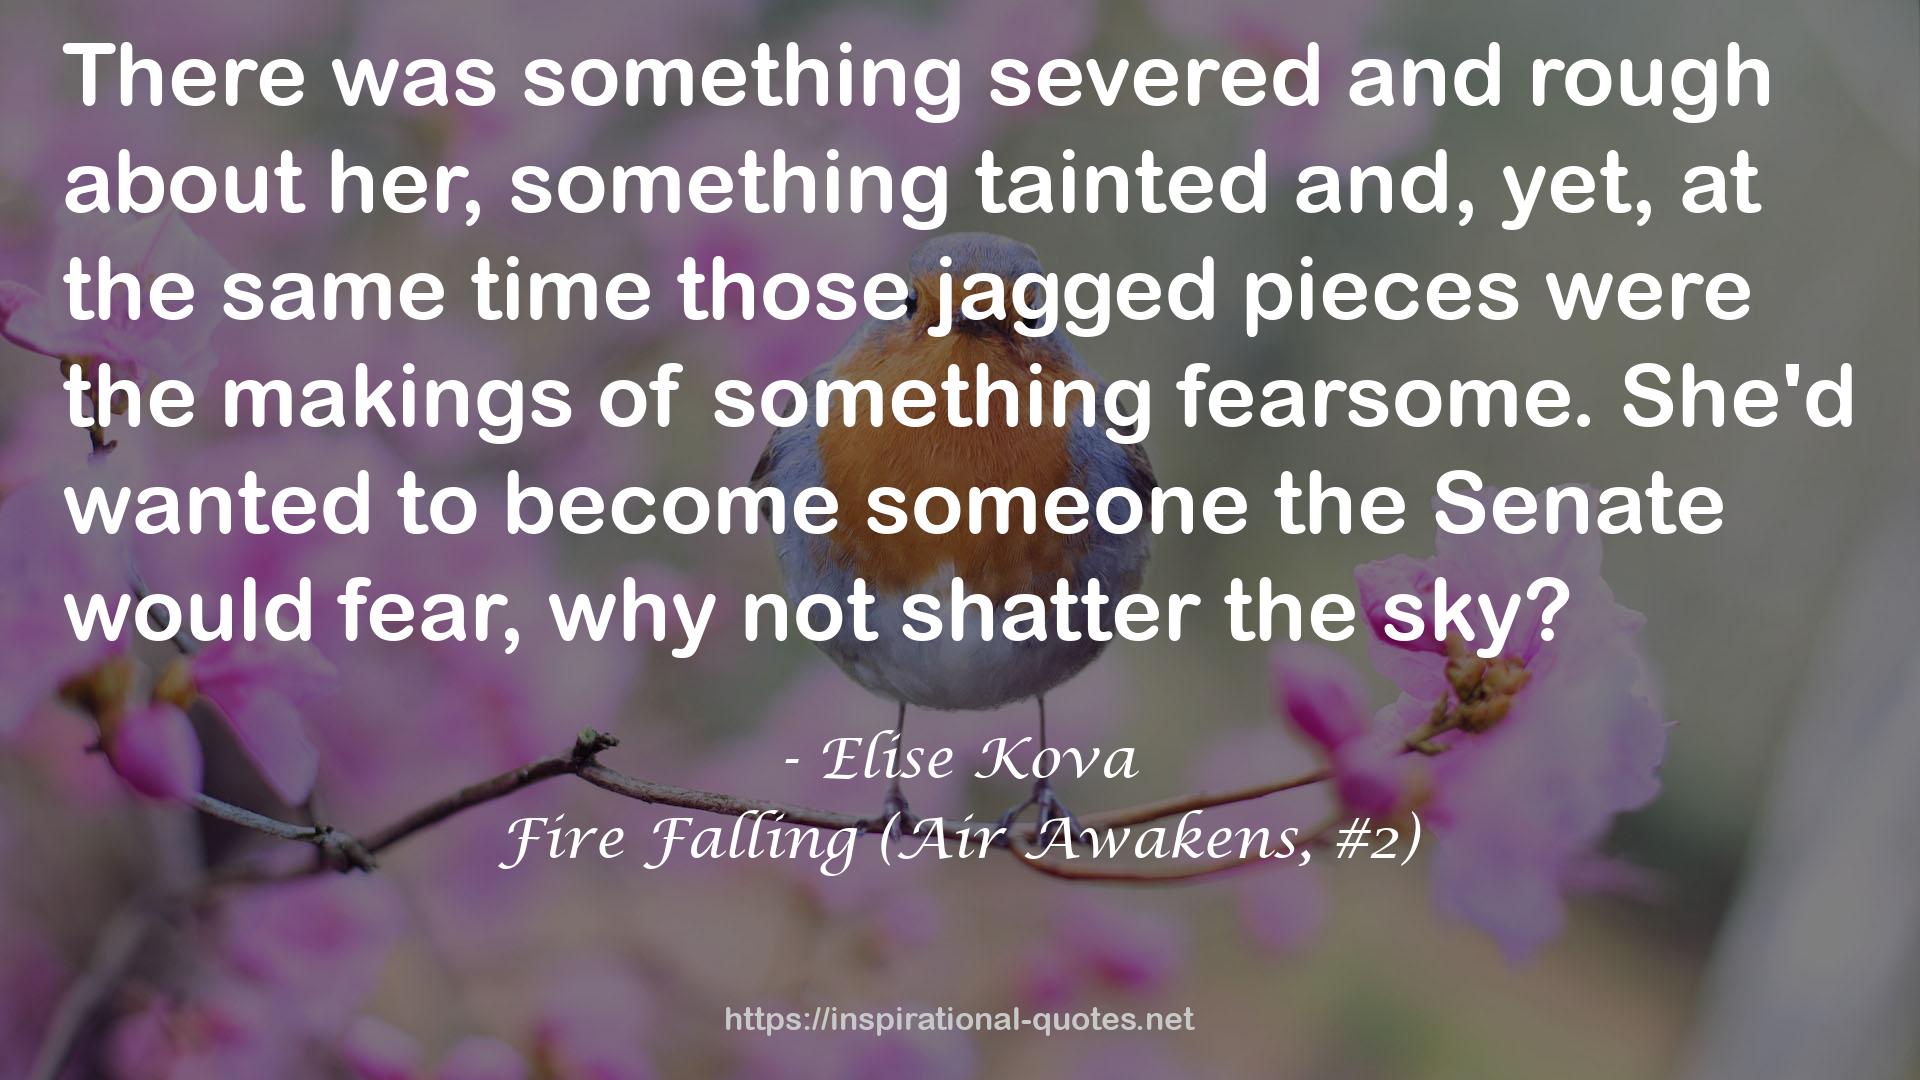 Fire Falling (Air Awakens, #2) QUOTES